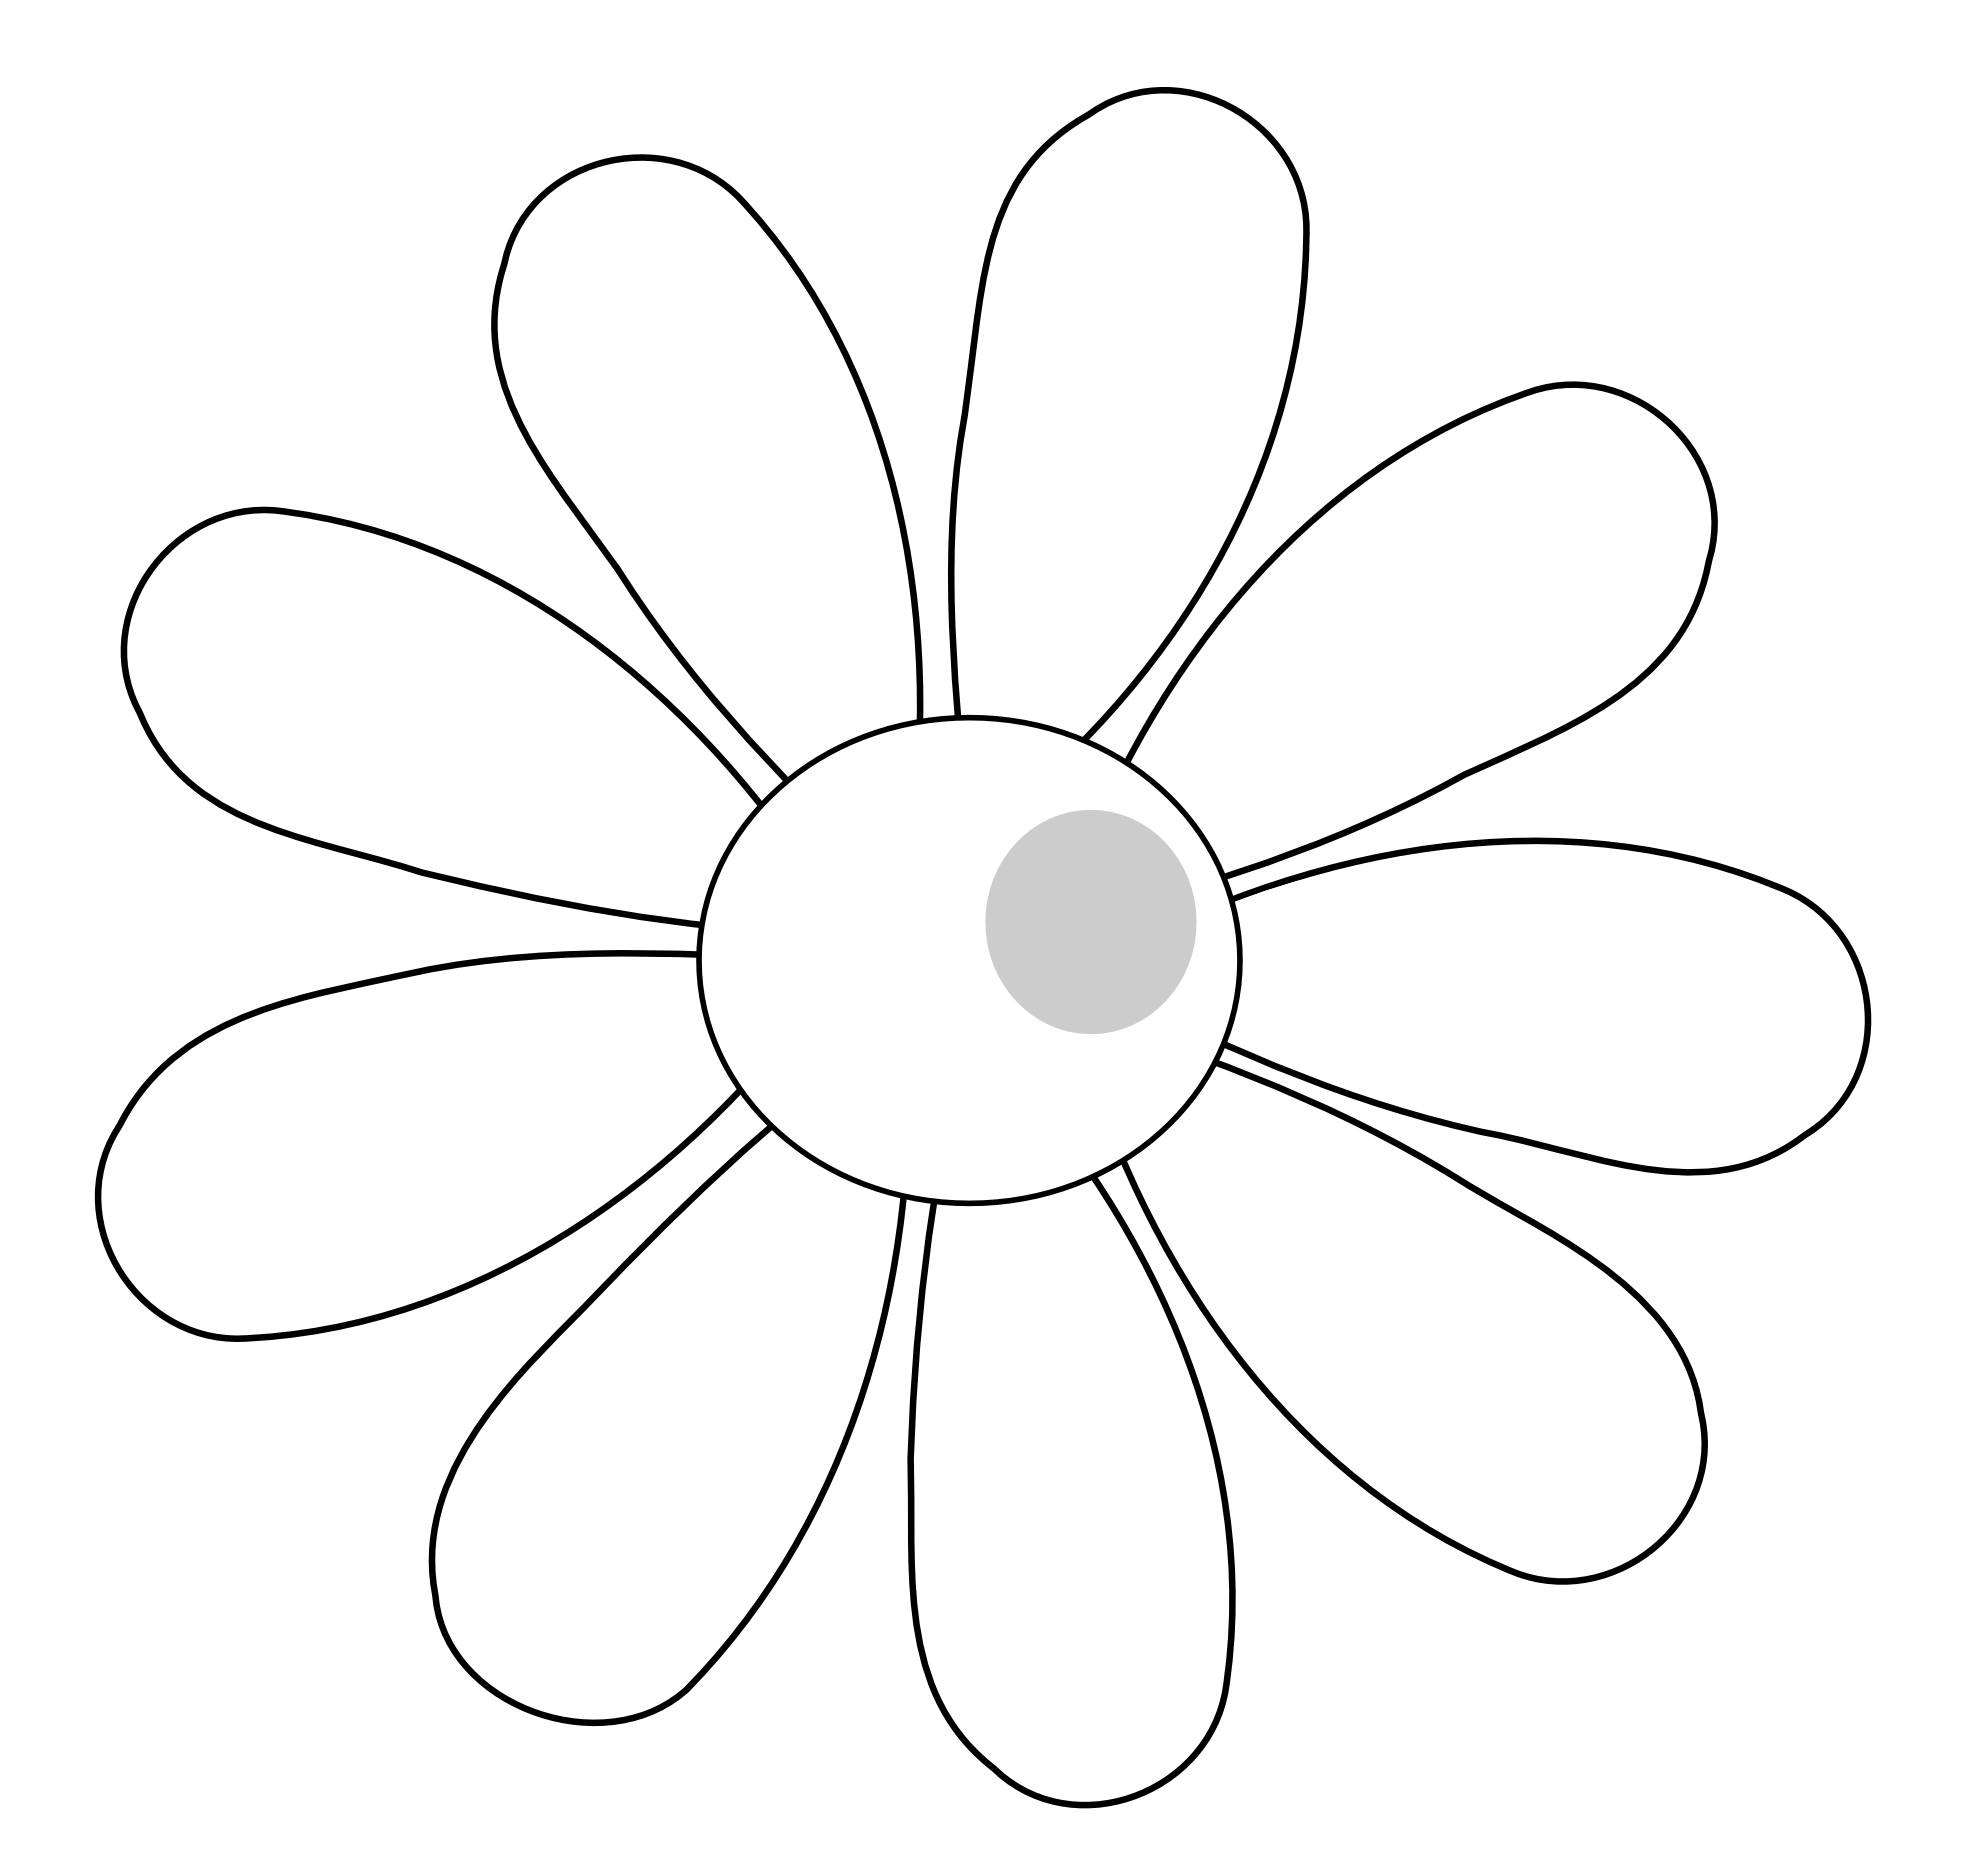 Flower clipart book. Images black and white